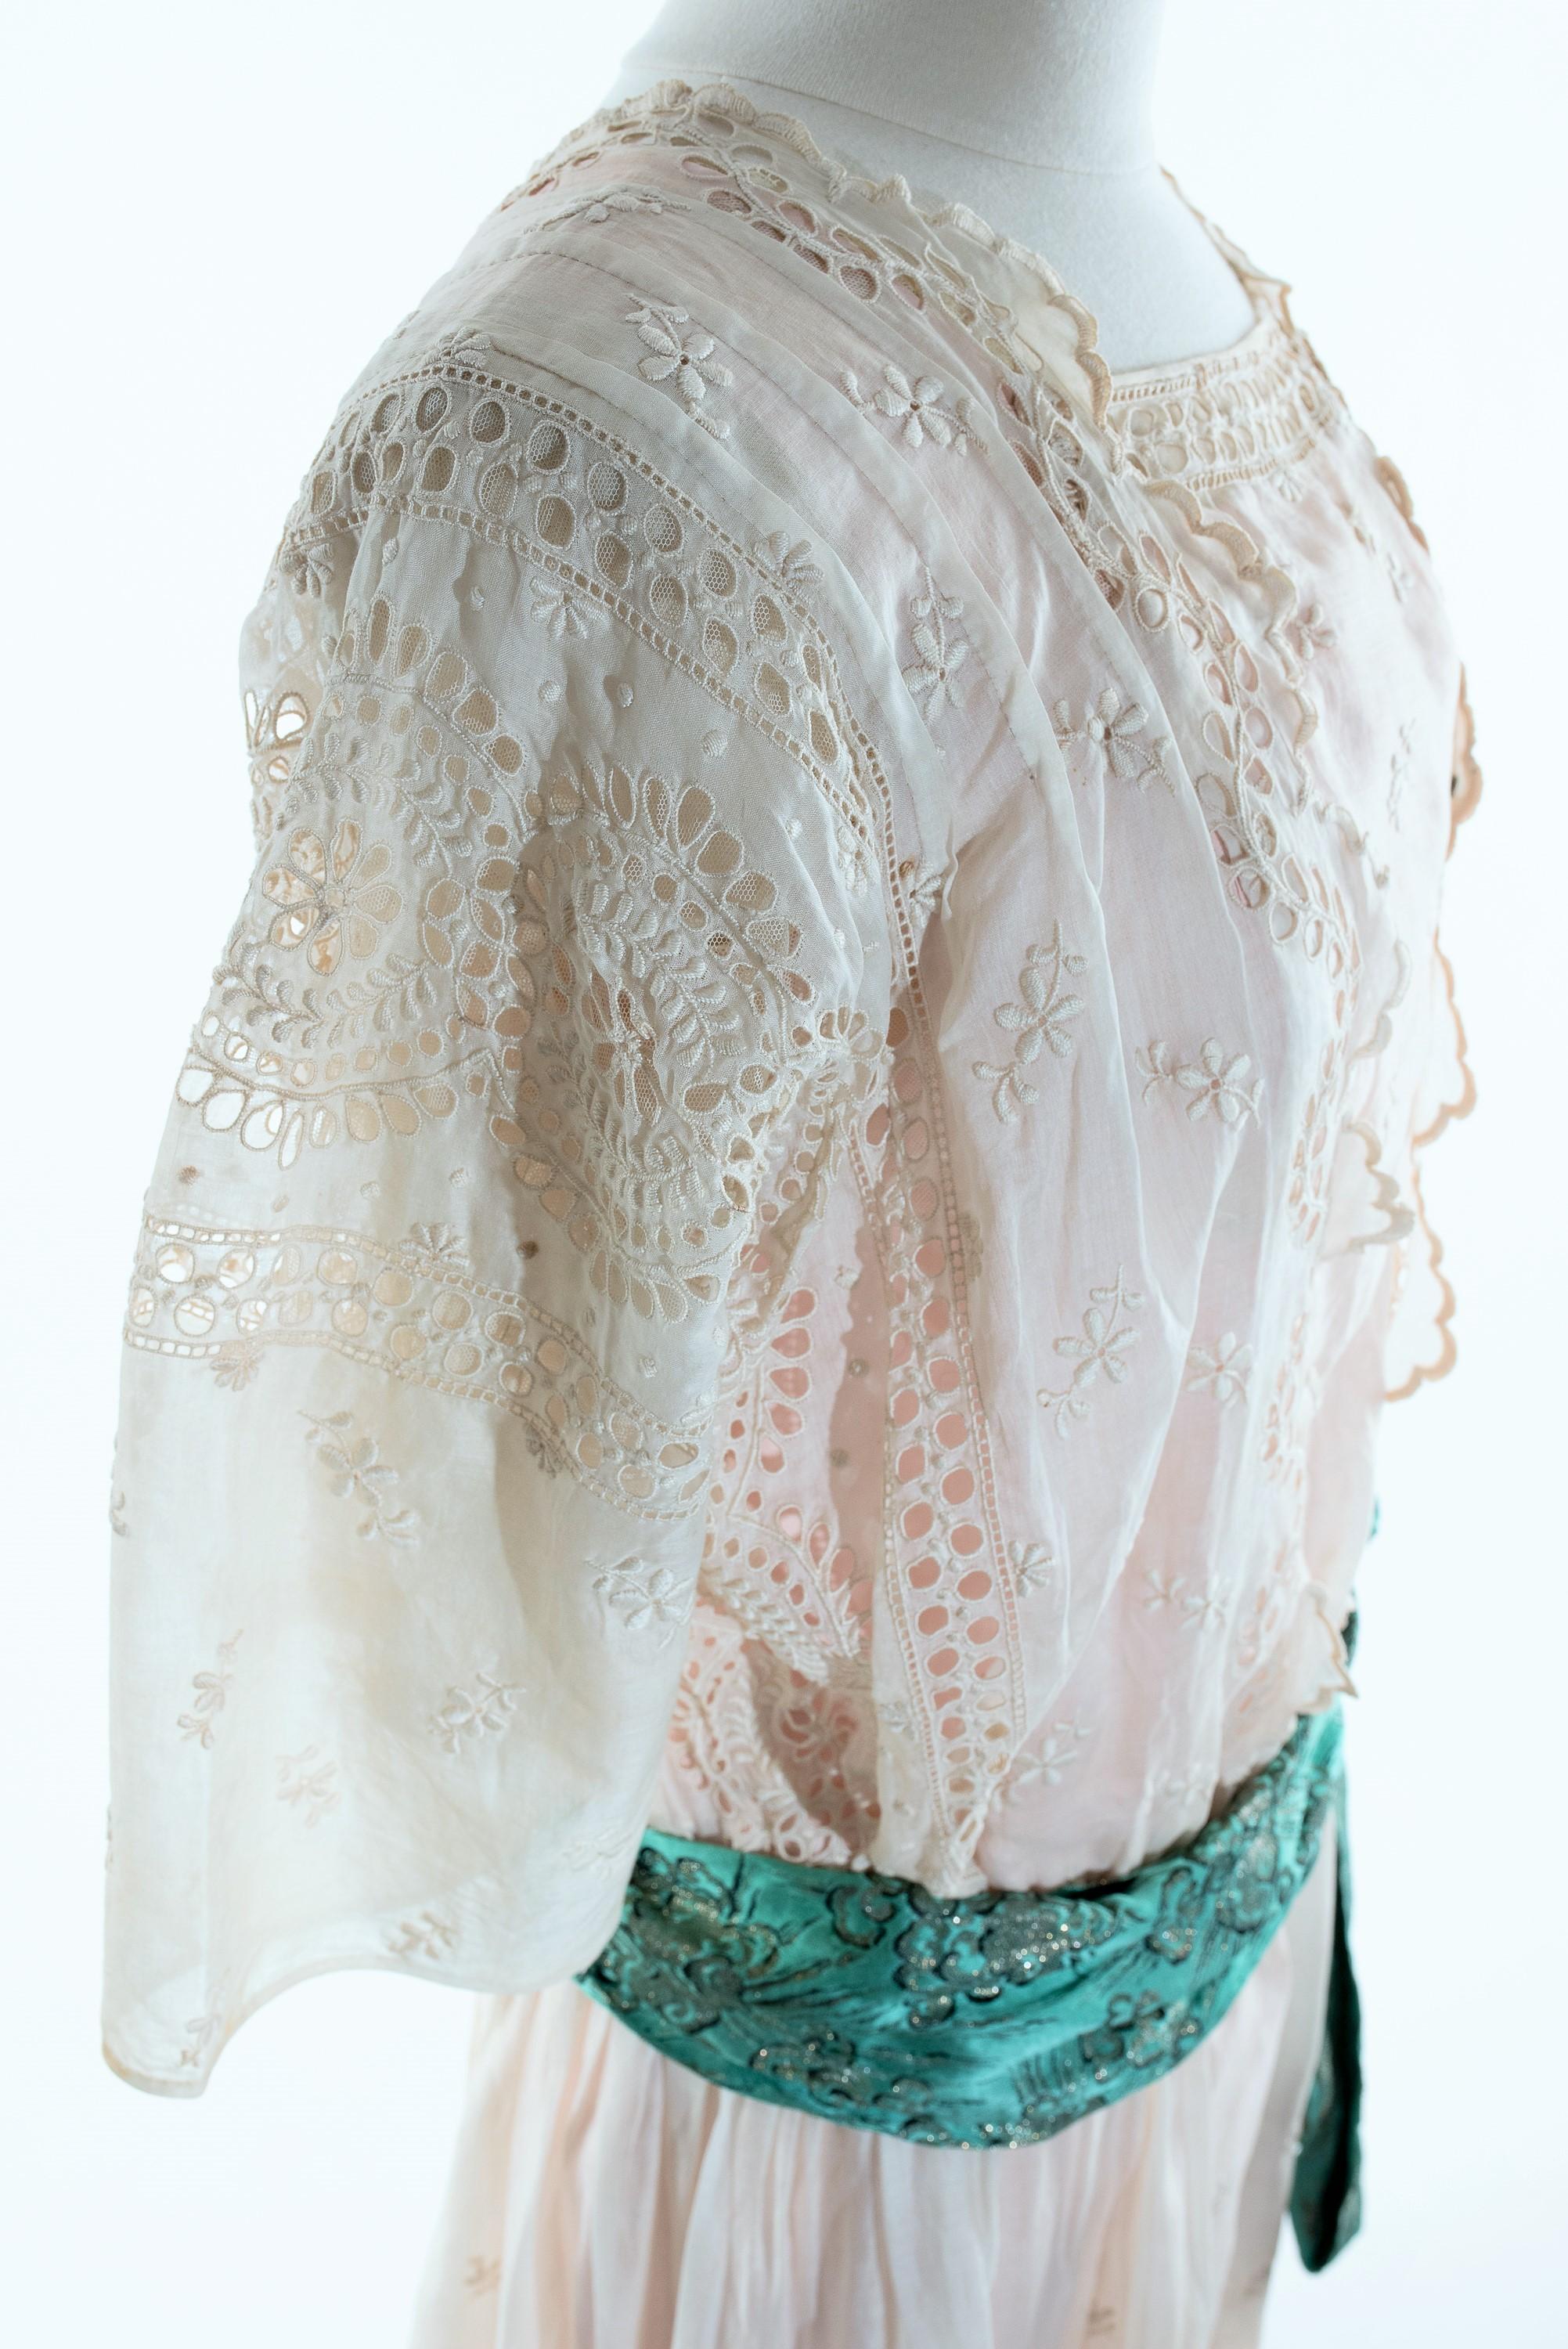 A silk pongee & White Embroidery Chiffon Summer Dress - France Circa 1920 For Sale 2